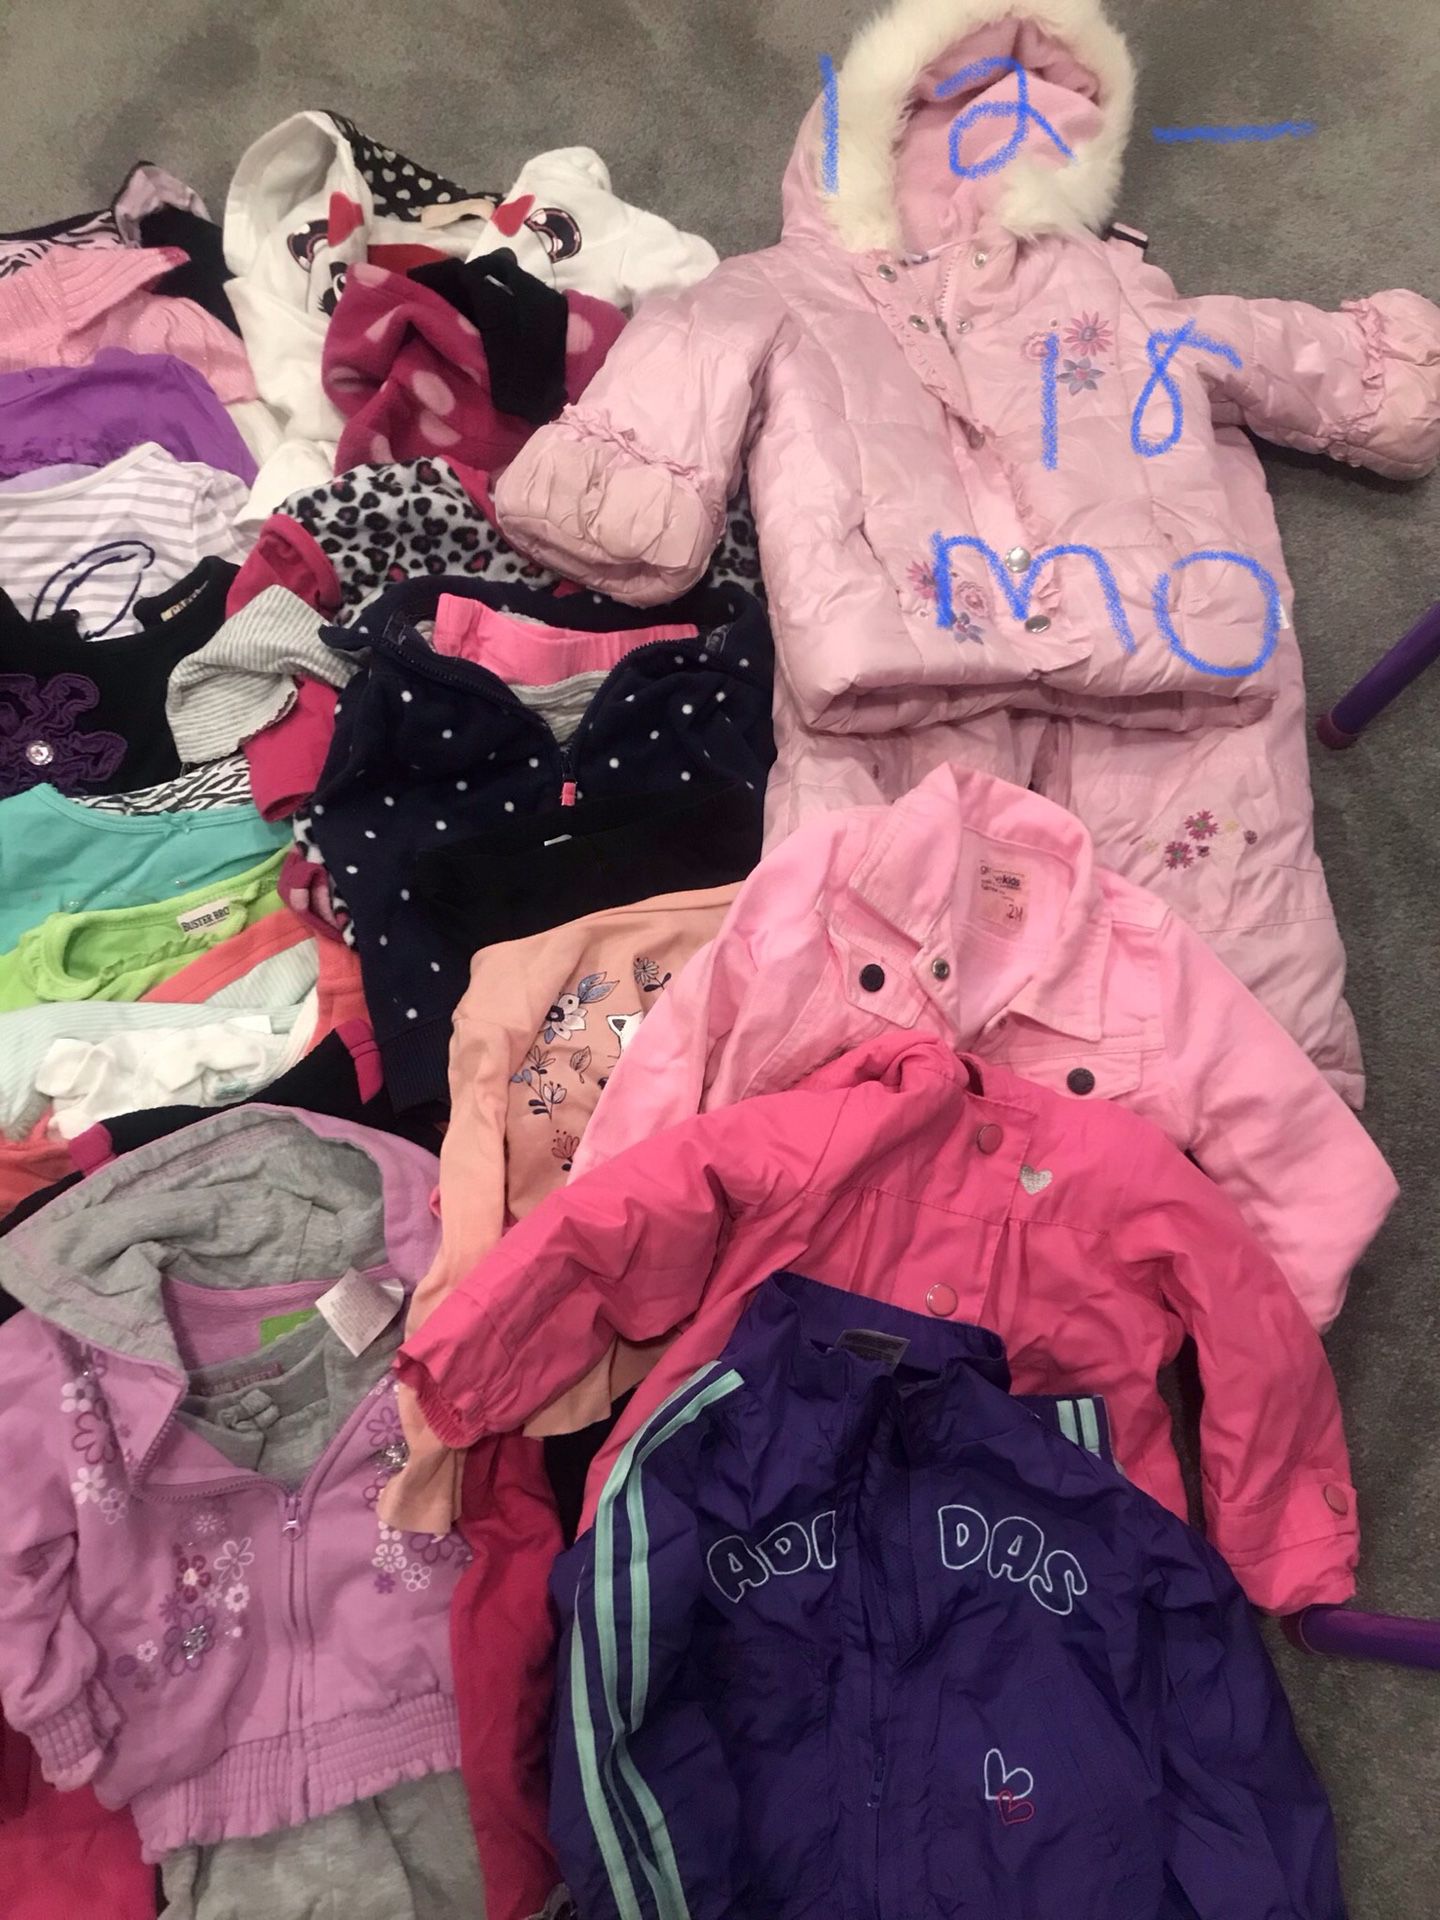 Girls clothing - 18 months (some 12 month) over 80 pieces